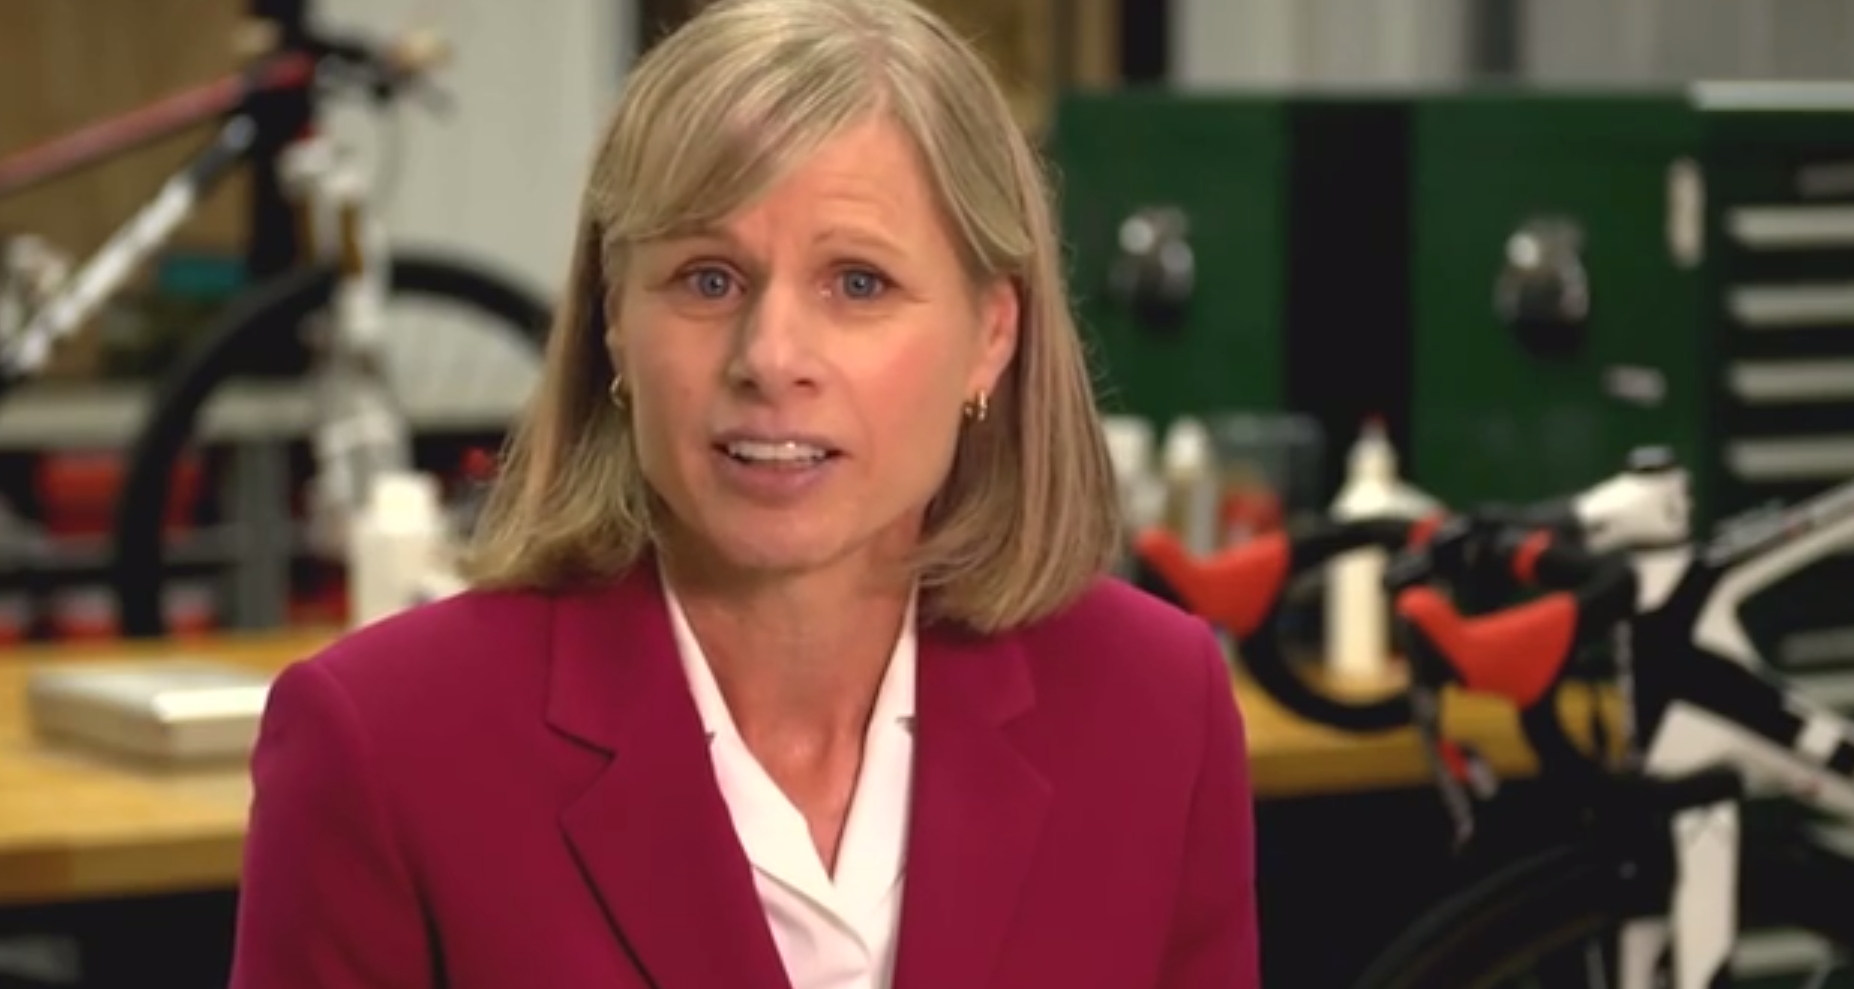 Mary Burke in a still from her campaign announcement video